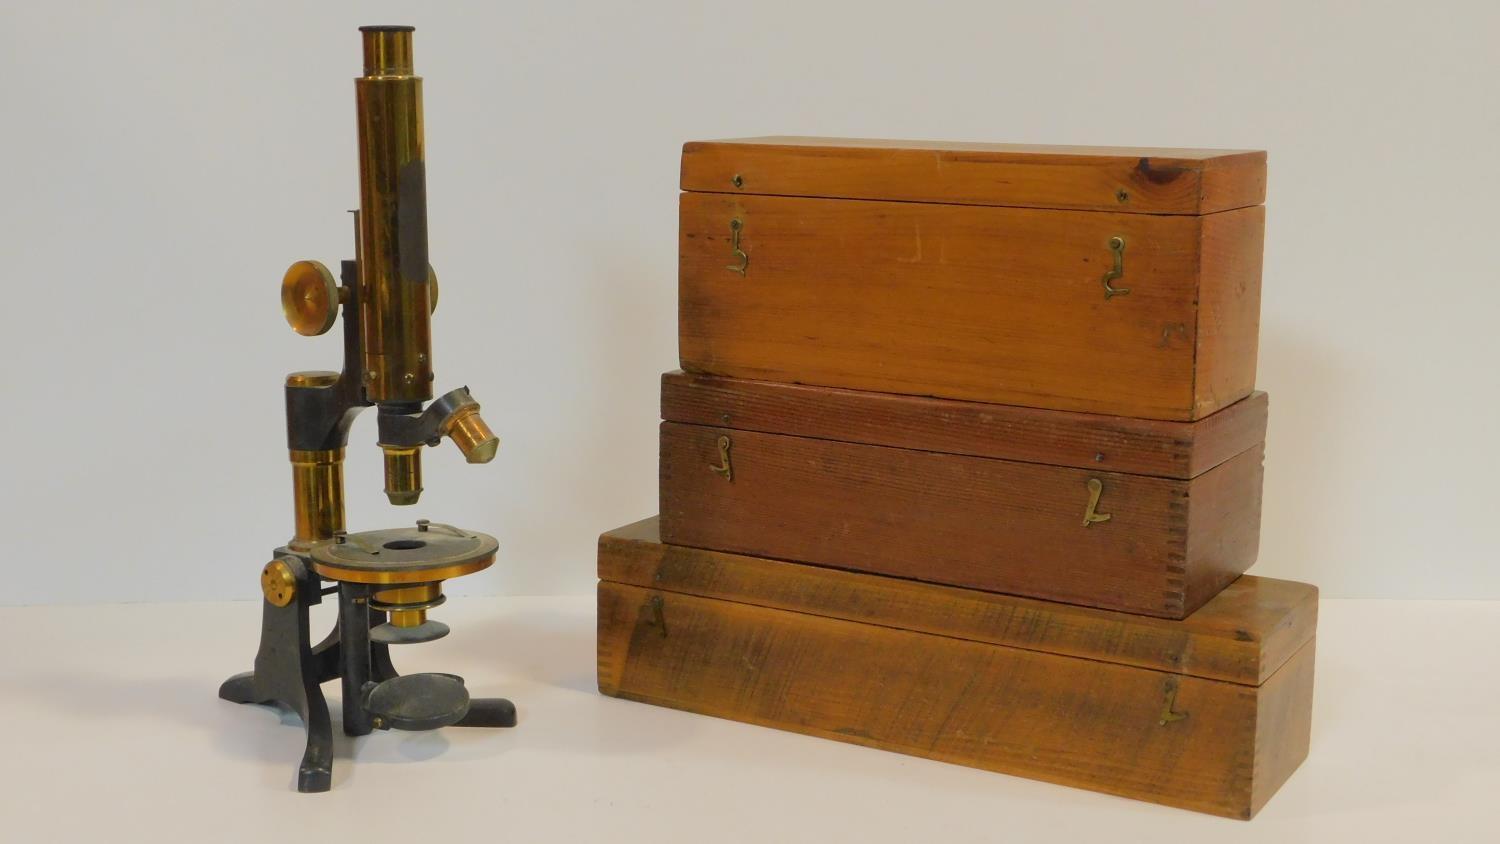 An Eclipse Ross of London lacquered brass microscope with Zeiss microscope eye piece. With three